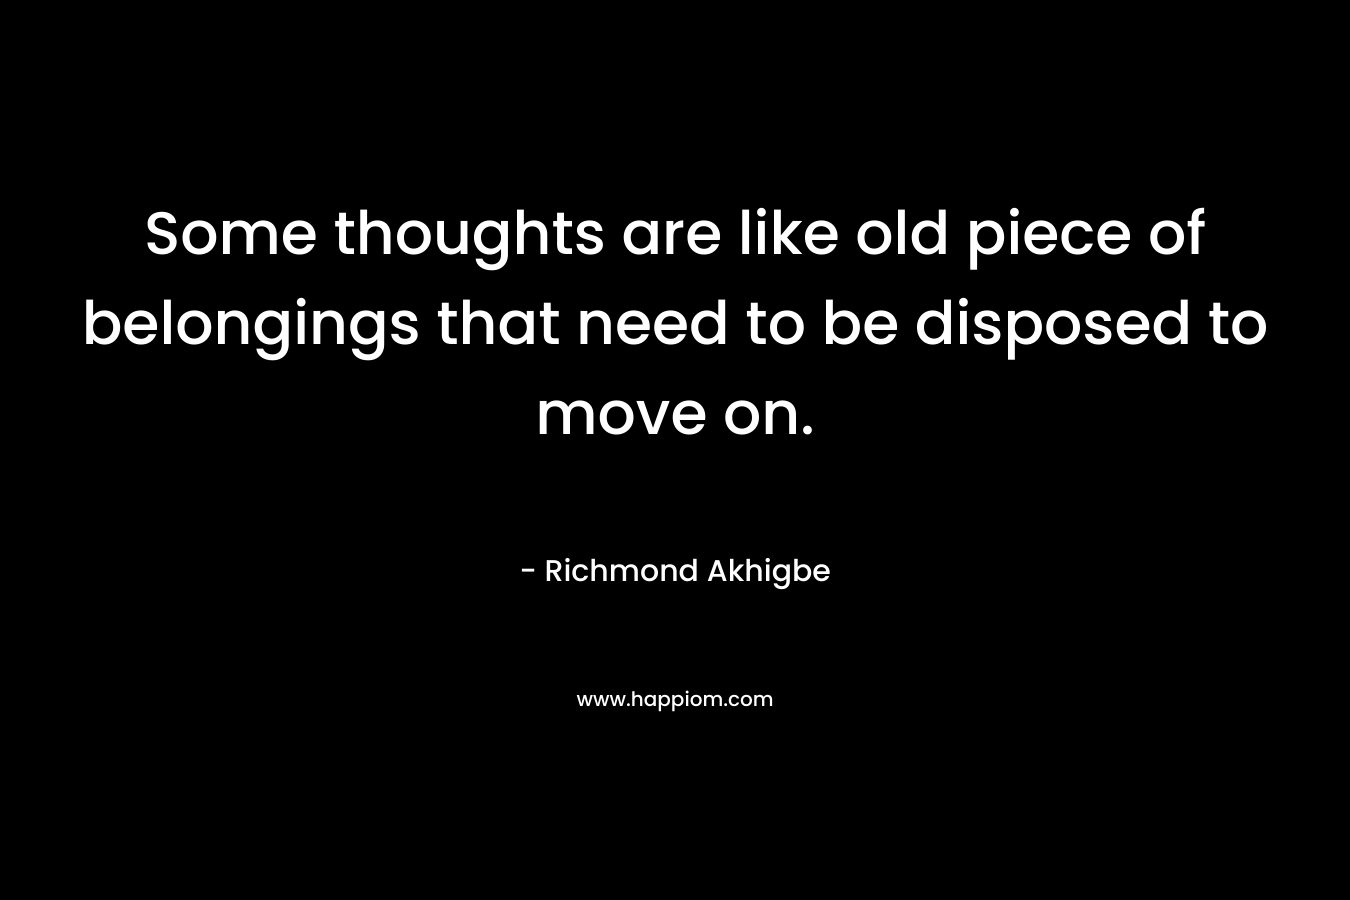 Some thoughts are like old piece of belongings that need to be disposed to move on.